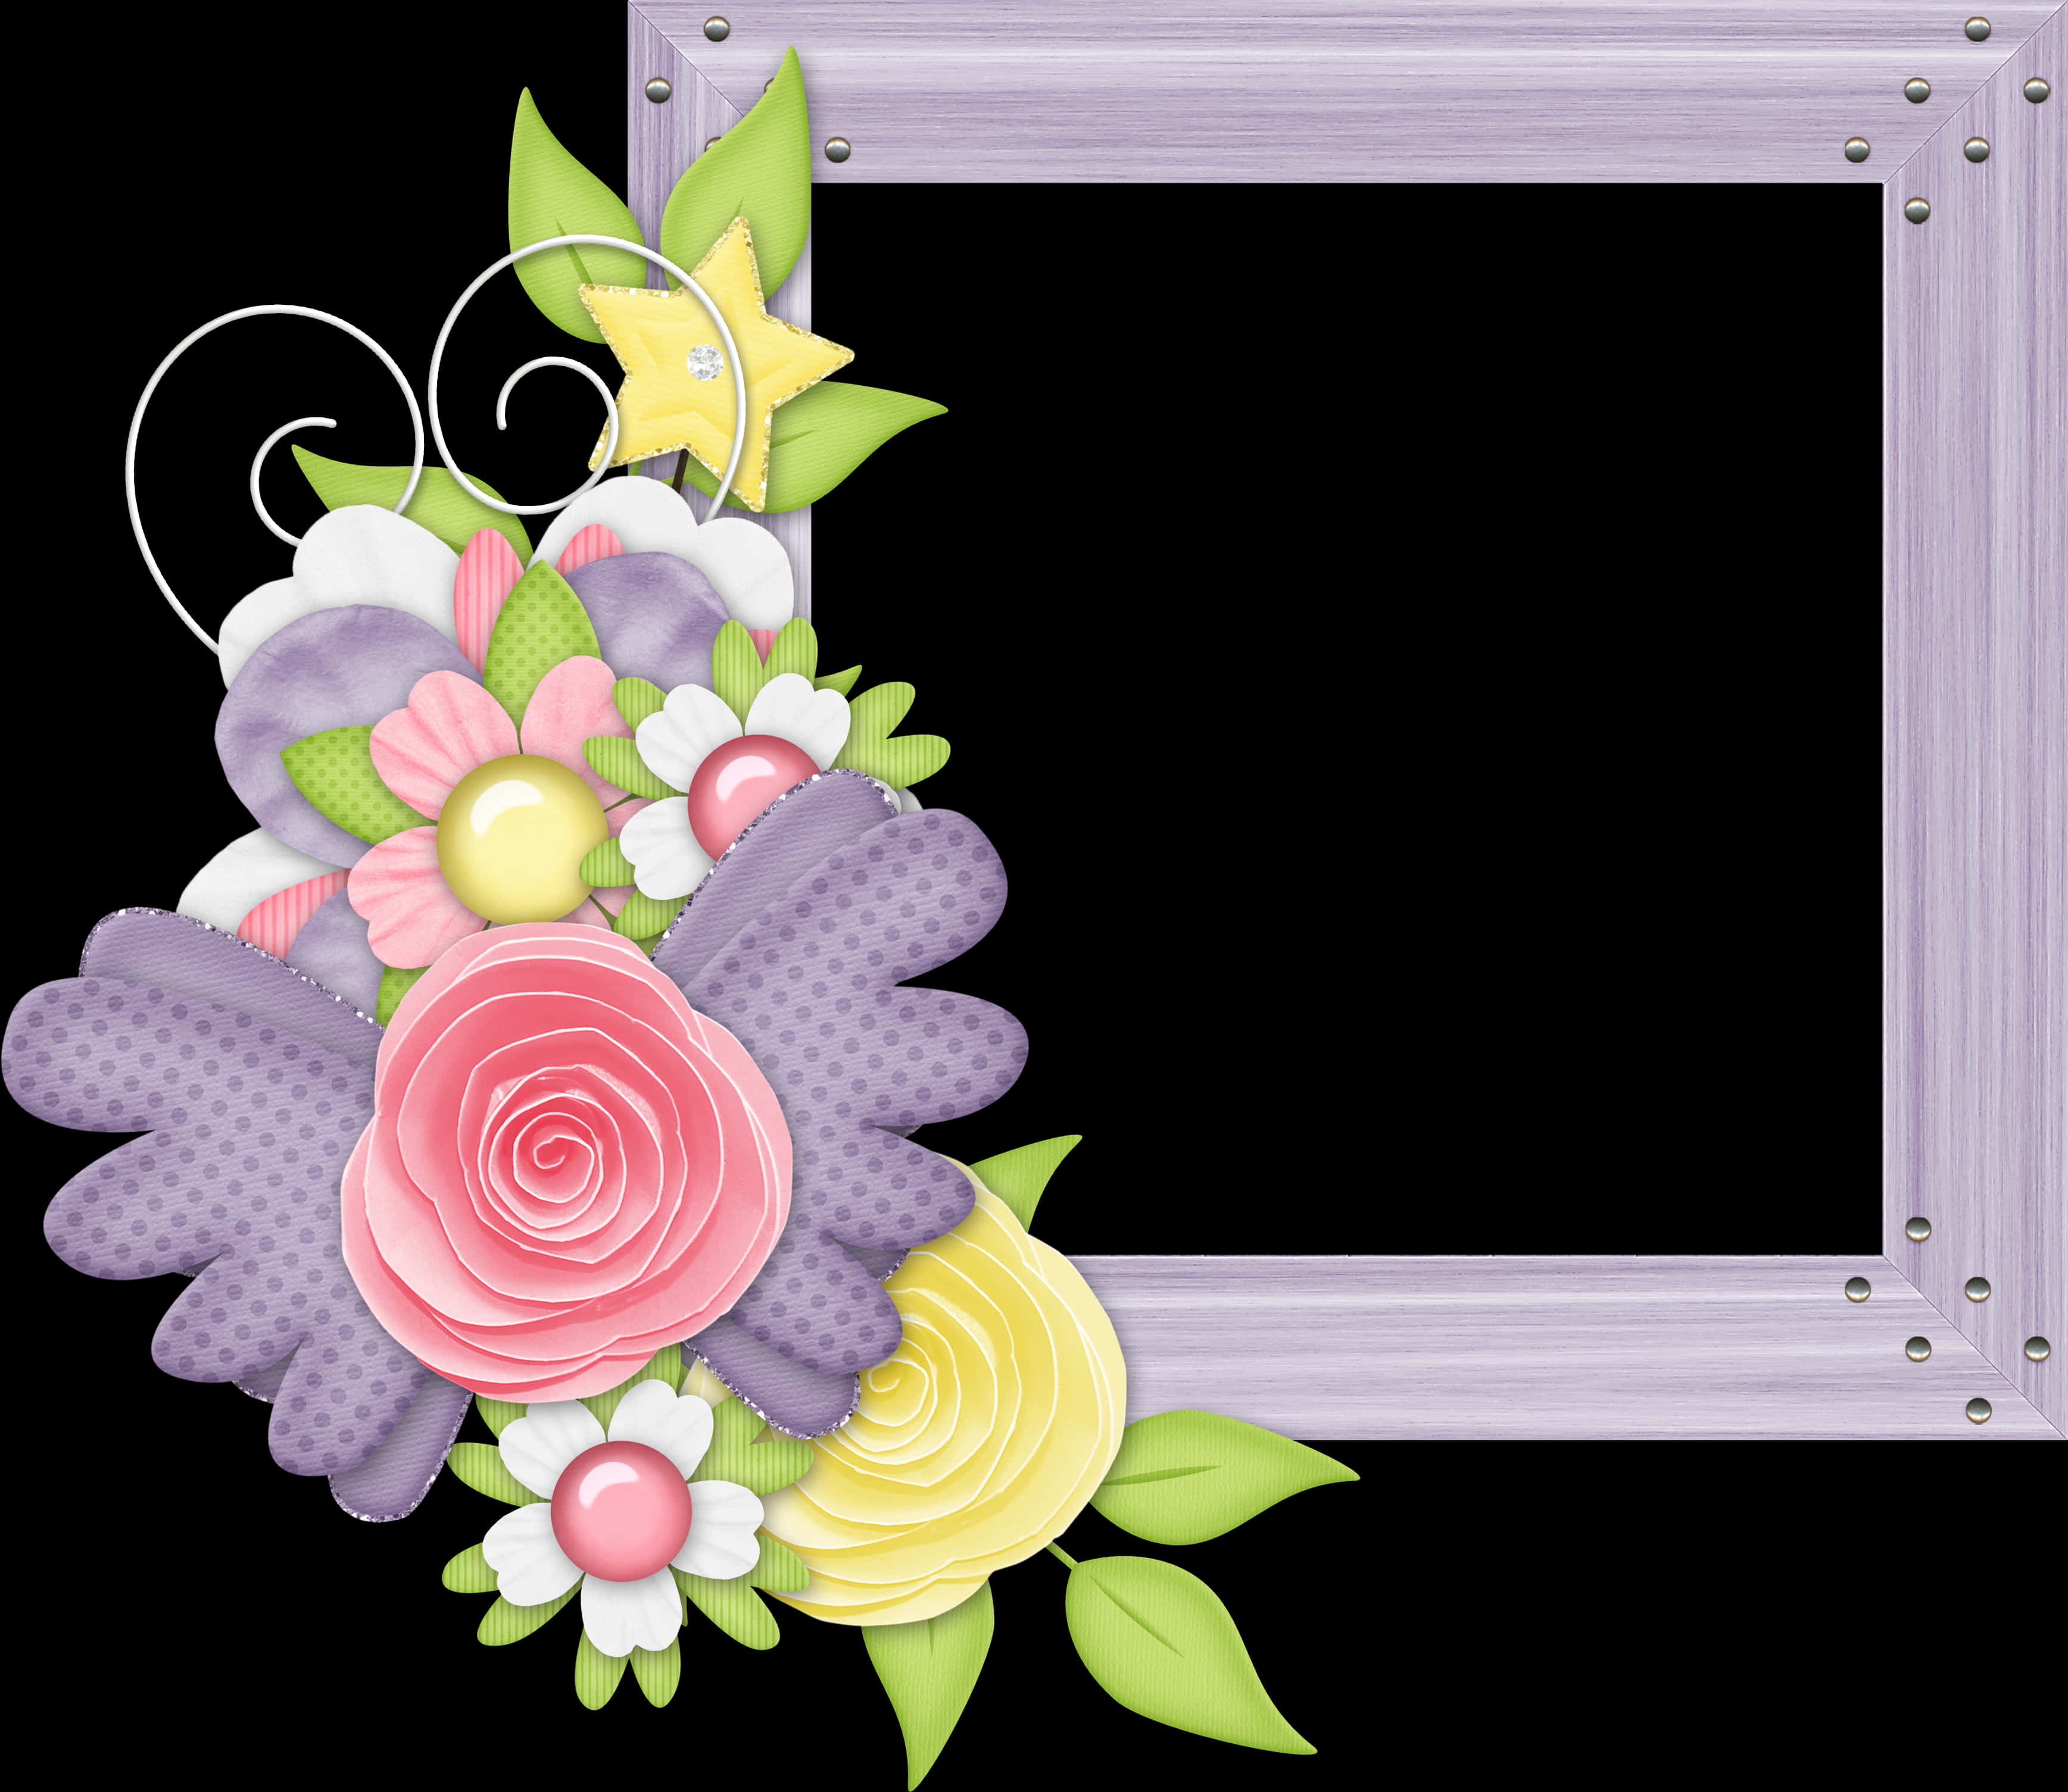 A Purple Frame With Flowers And Leaves